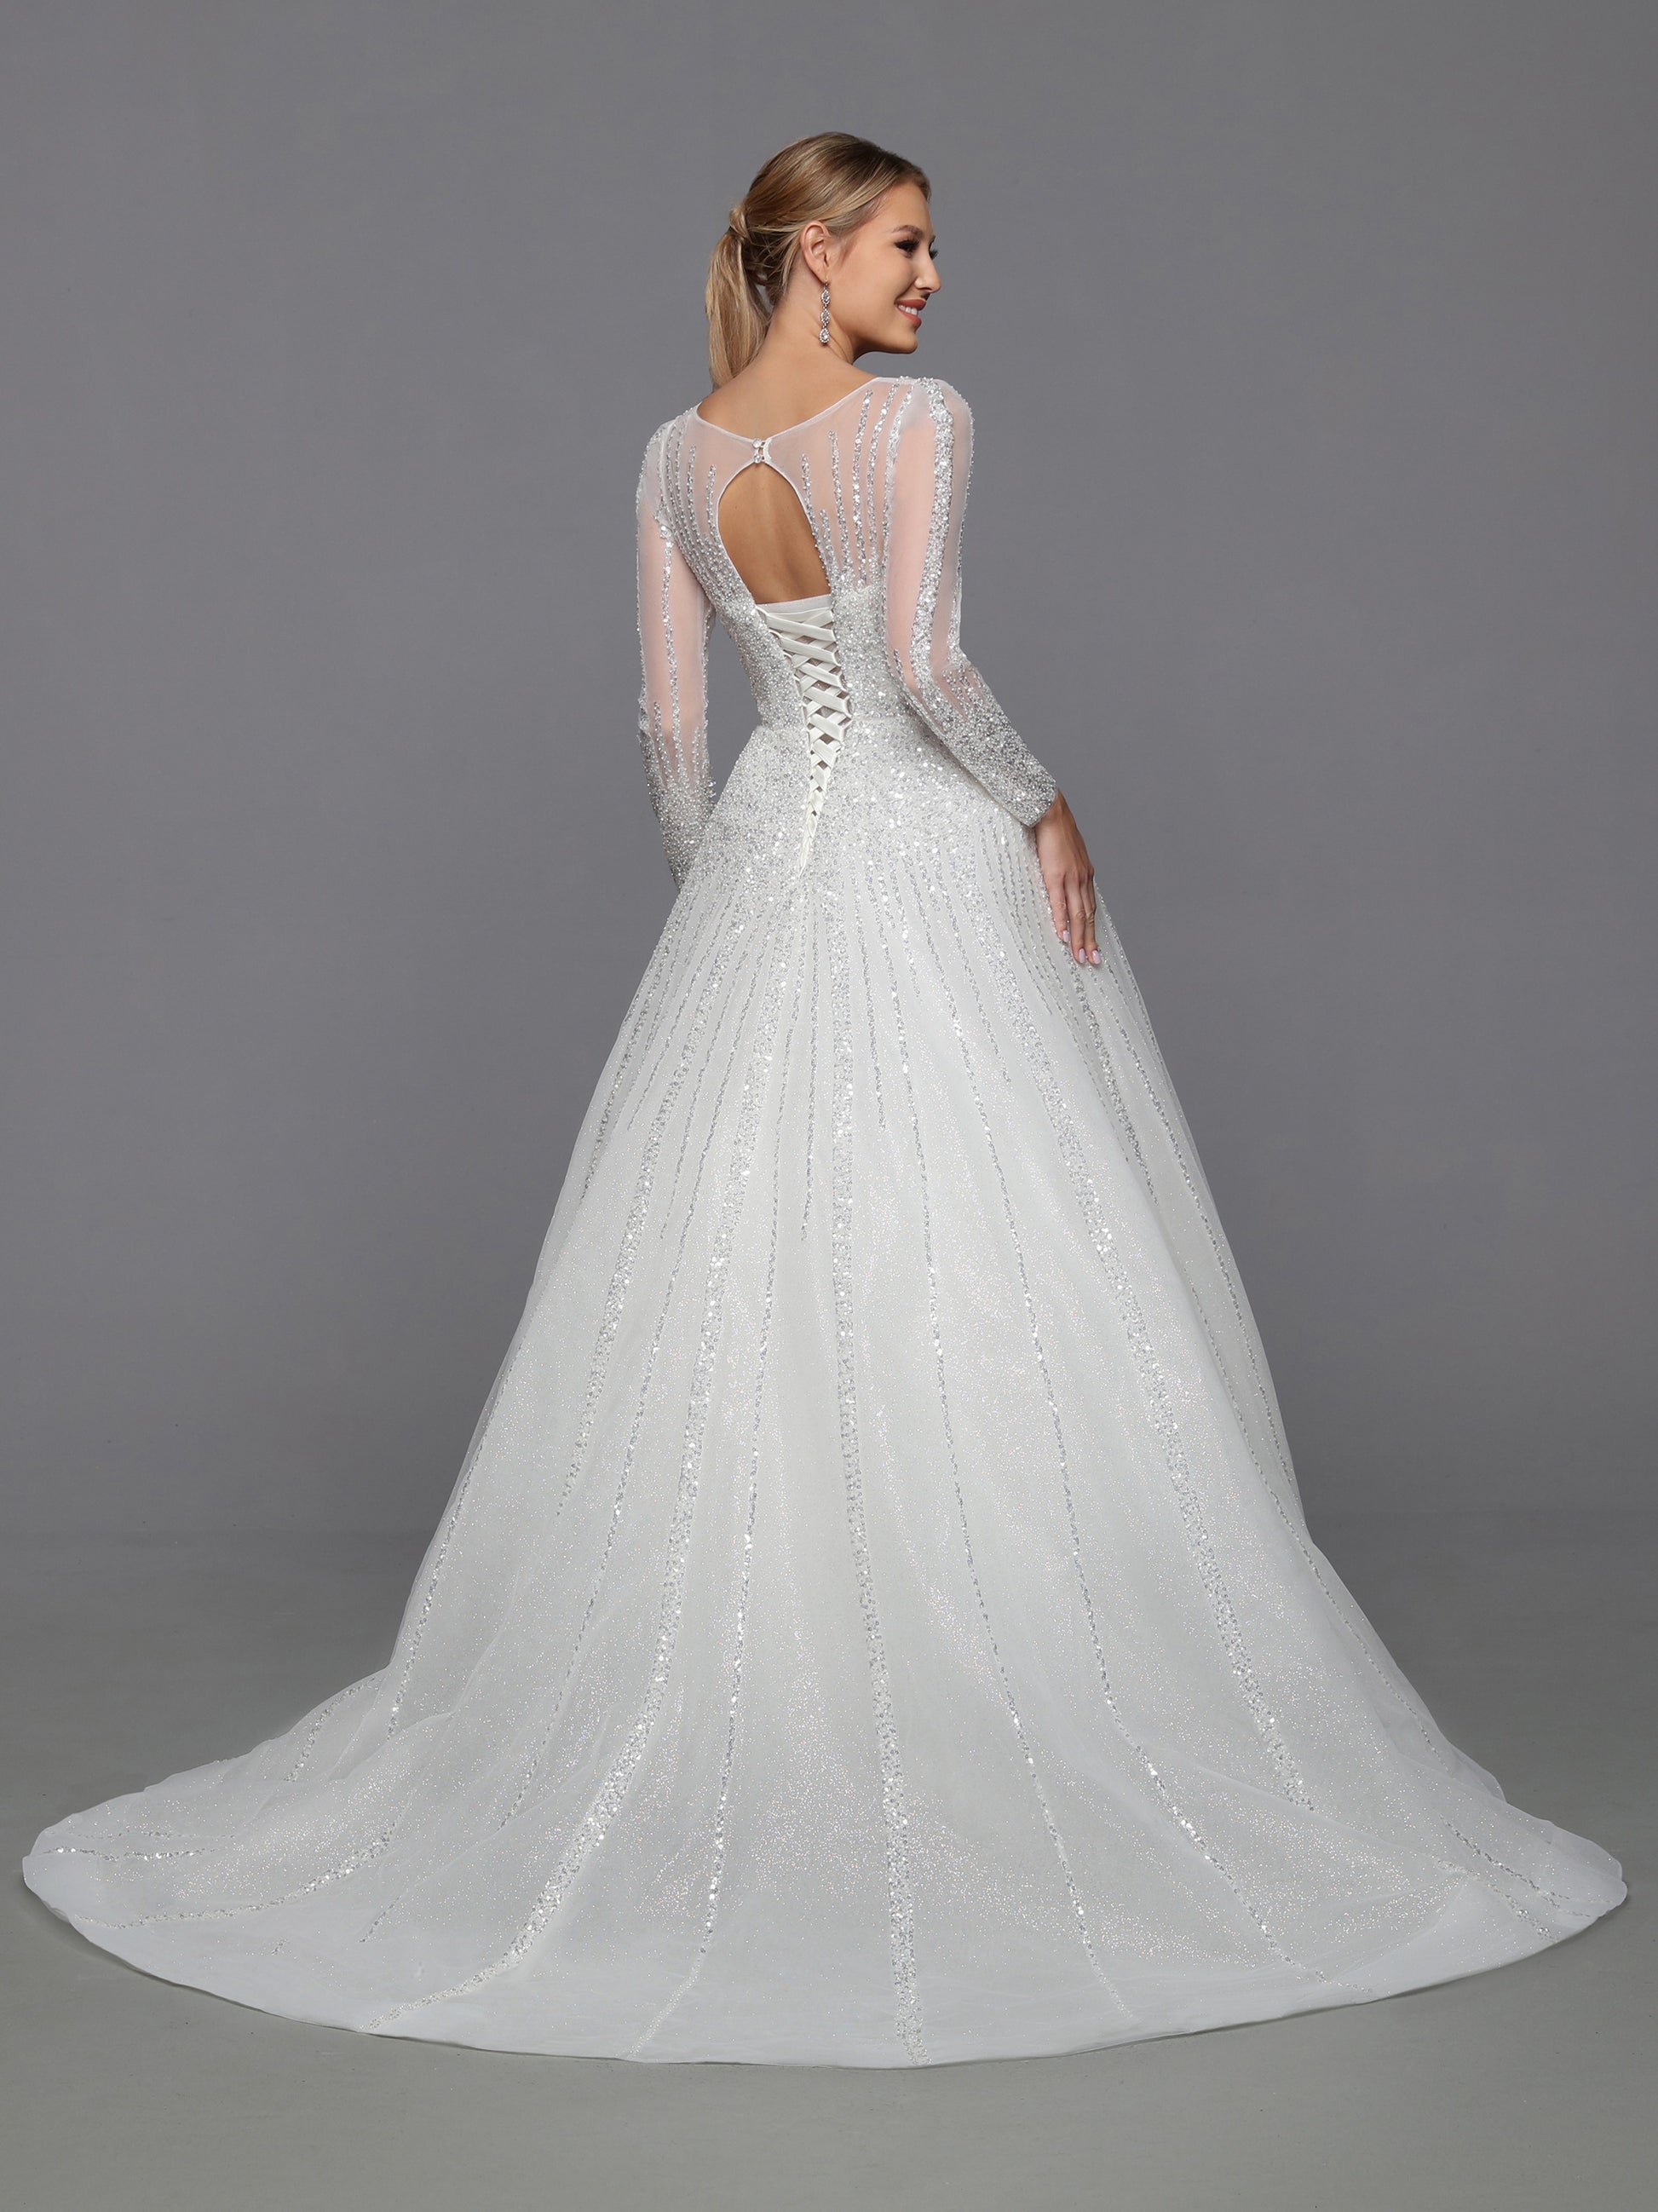 DaVinci Bridal 50764 A-Line Ballgown High Neck Long Sleeve Open Back Train Wedding Gown. On-trend glitter tulle brings this ball gown to life. Designer details include a sheer bodice, full-length sleeves, and a corset back.